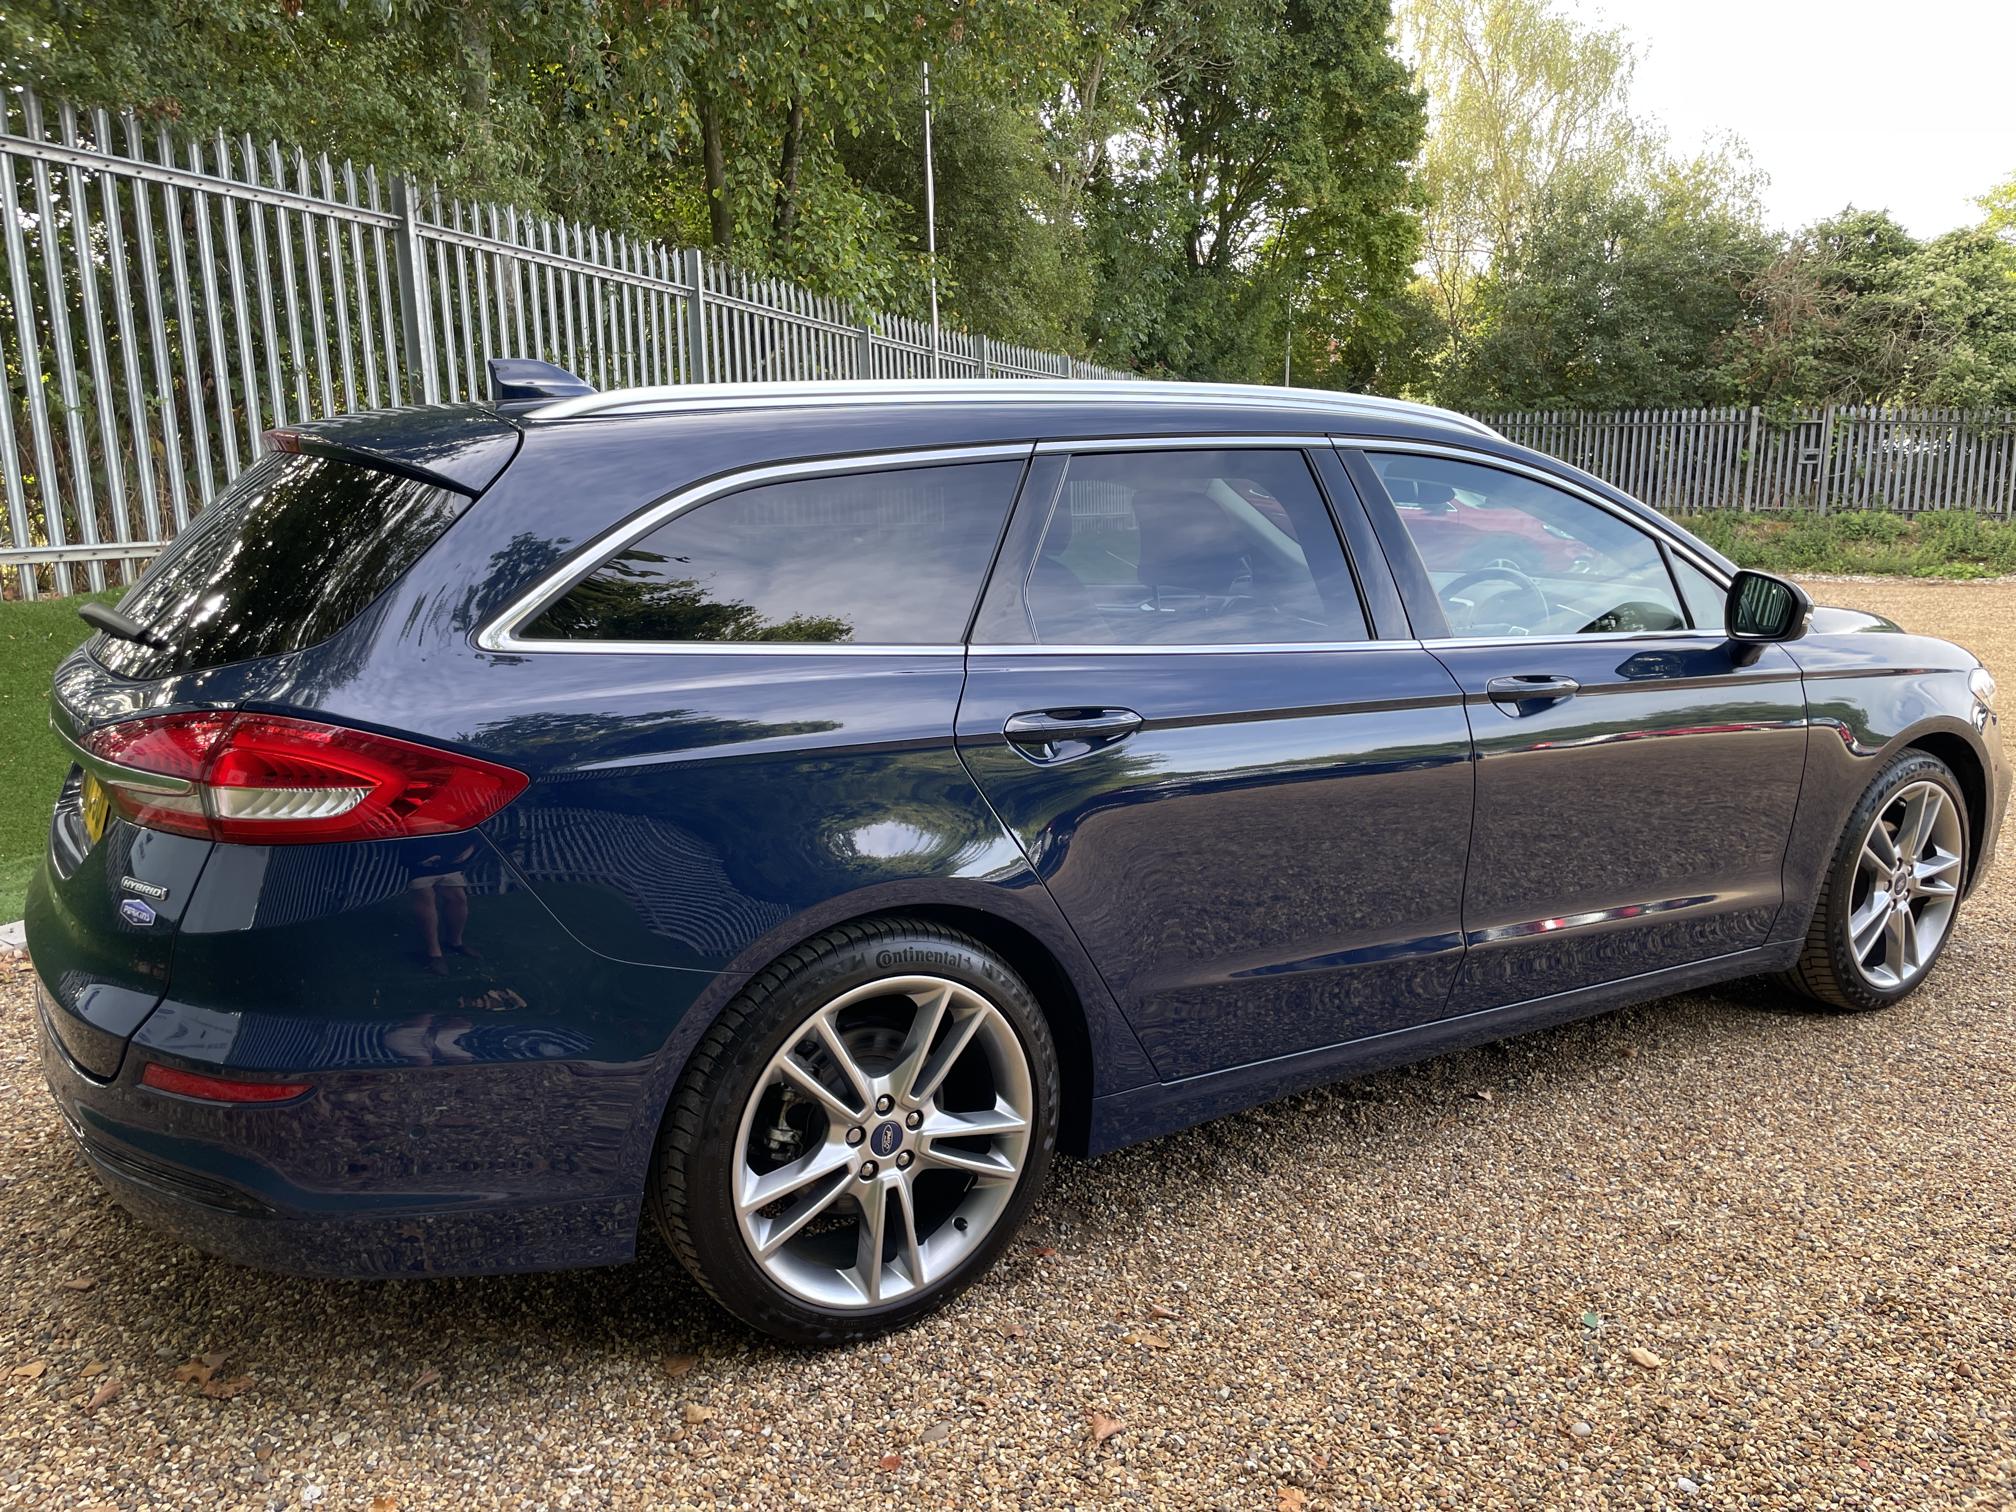 HEV Hybird Mondeo Estate Panoramic Roof for sale Essex